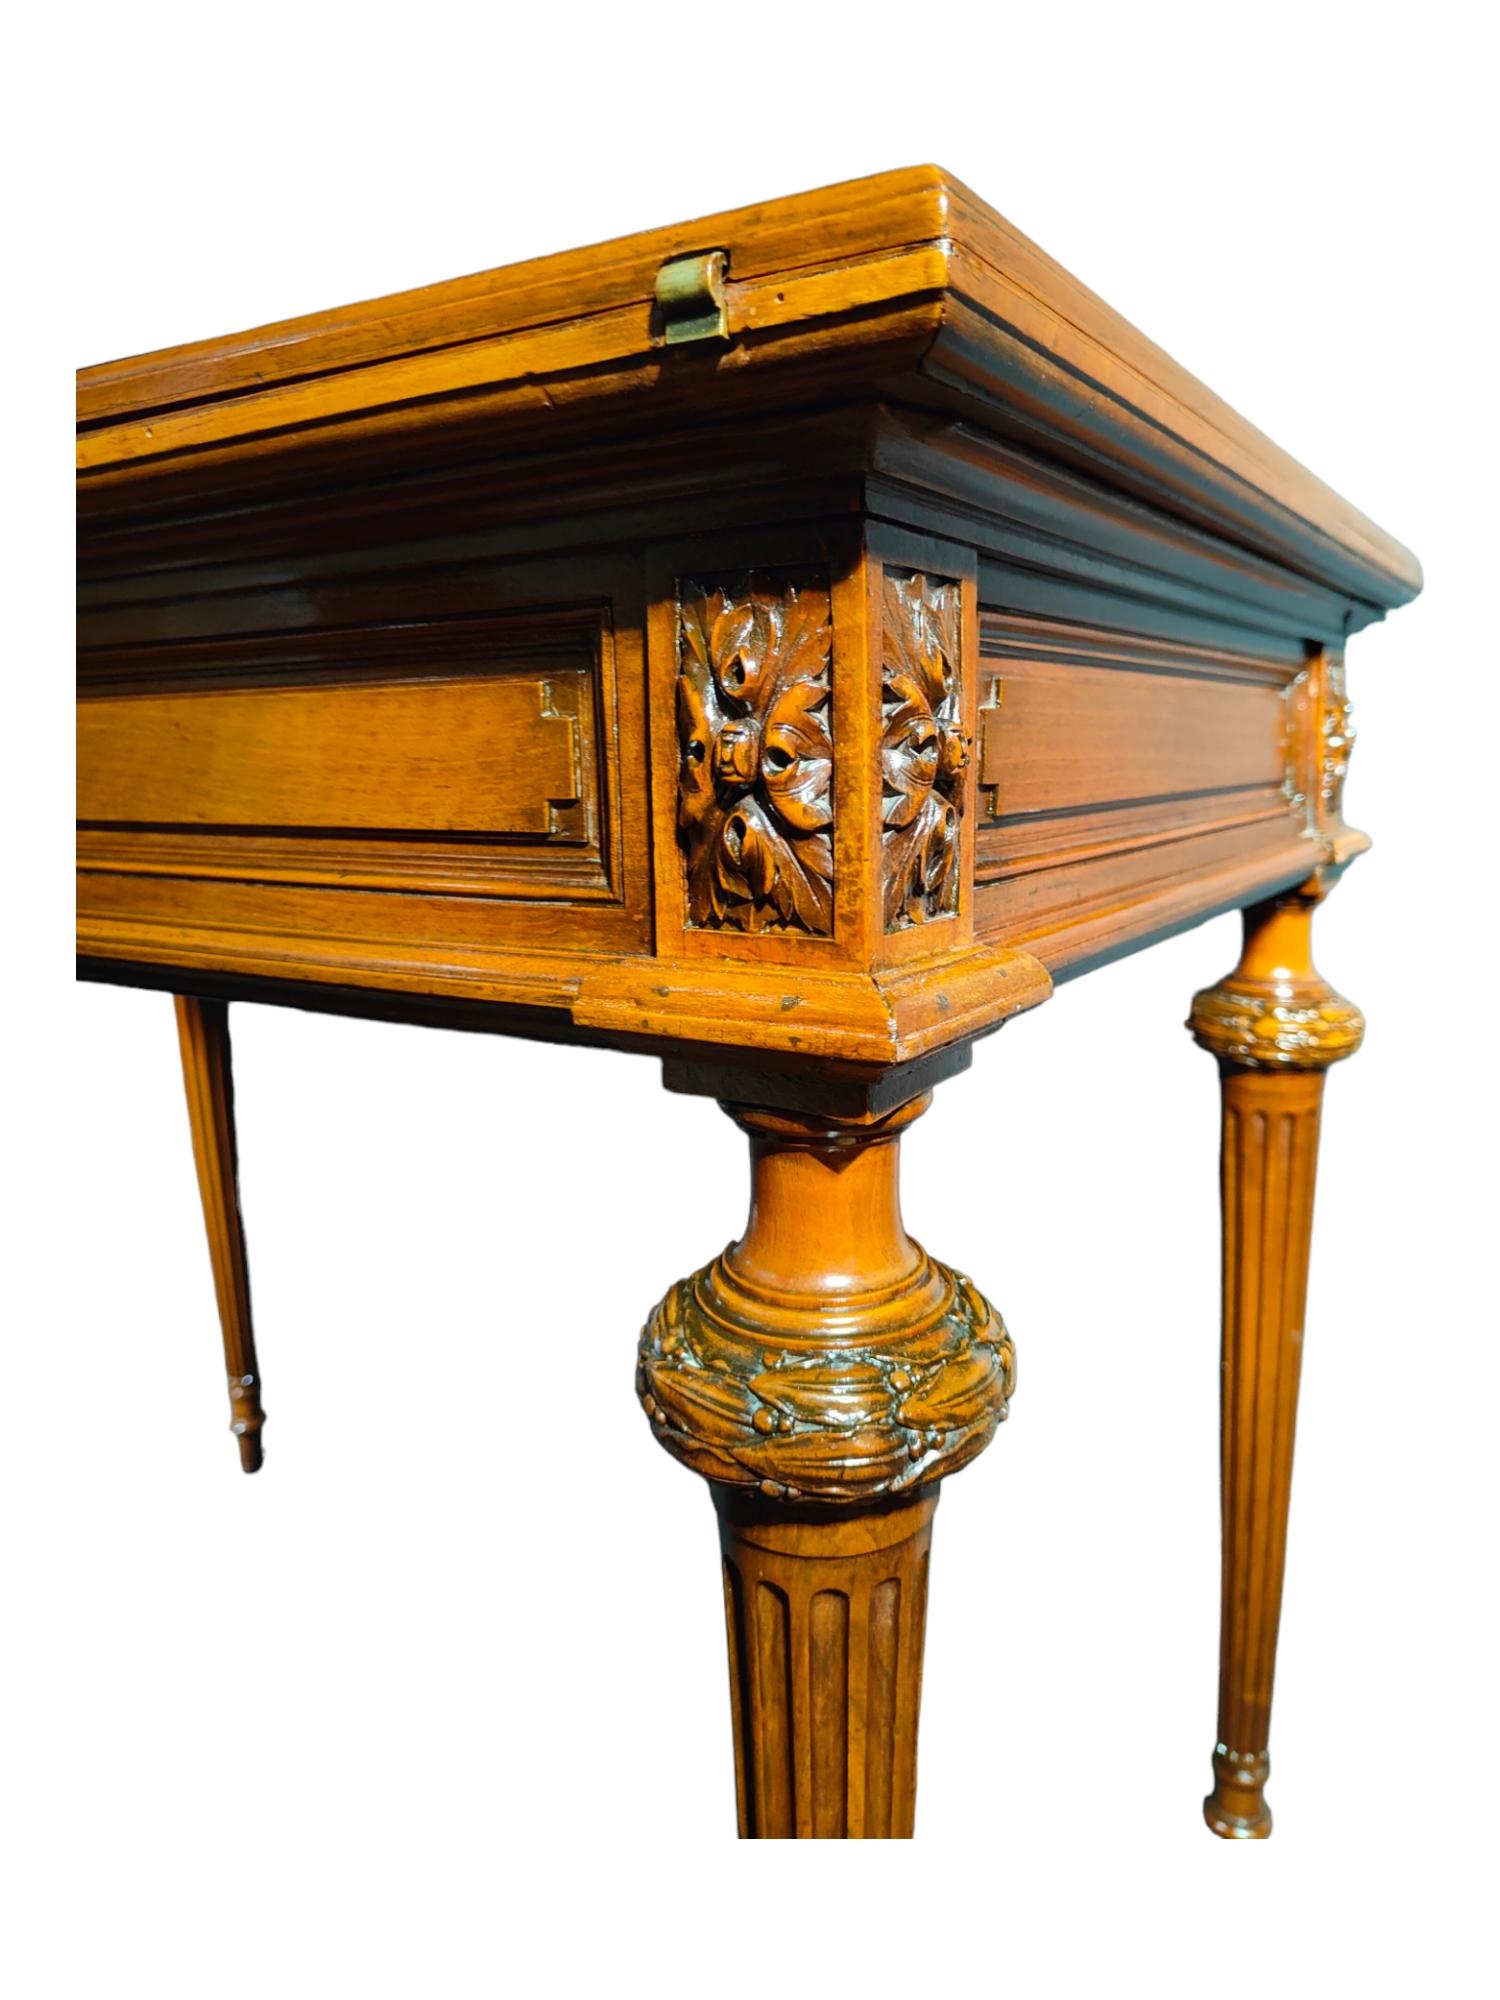 Important French game table from the 19th century.
French game table made by a 19th century cabinetmaker - signed. the table has a mechanism that allows the lid to turn and open. It also has a locking system. the left side legs extend and extend